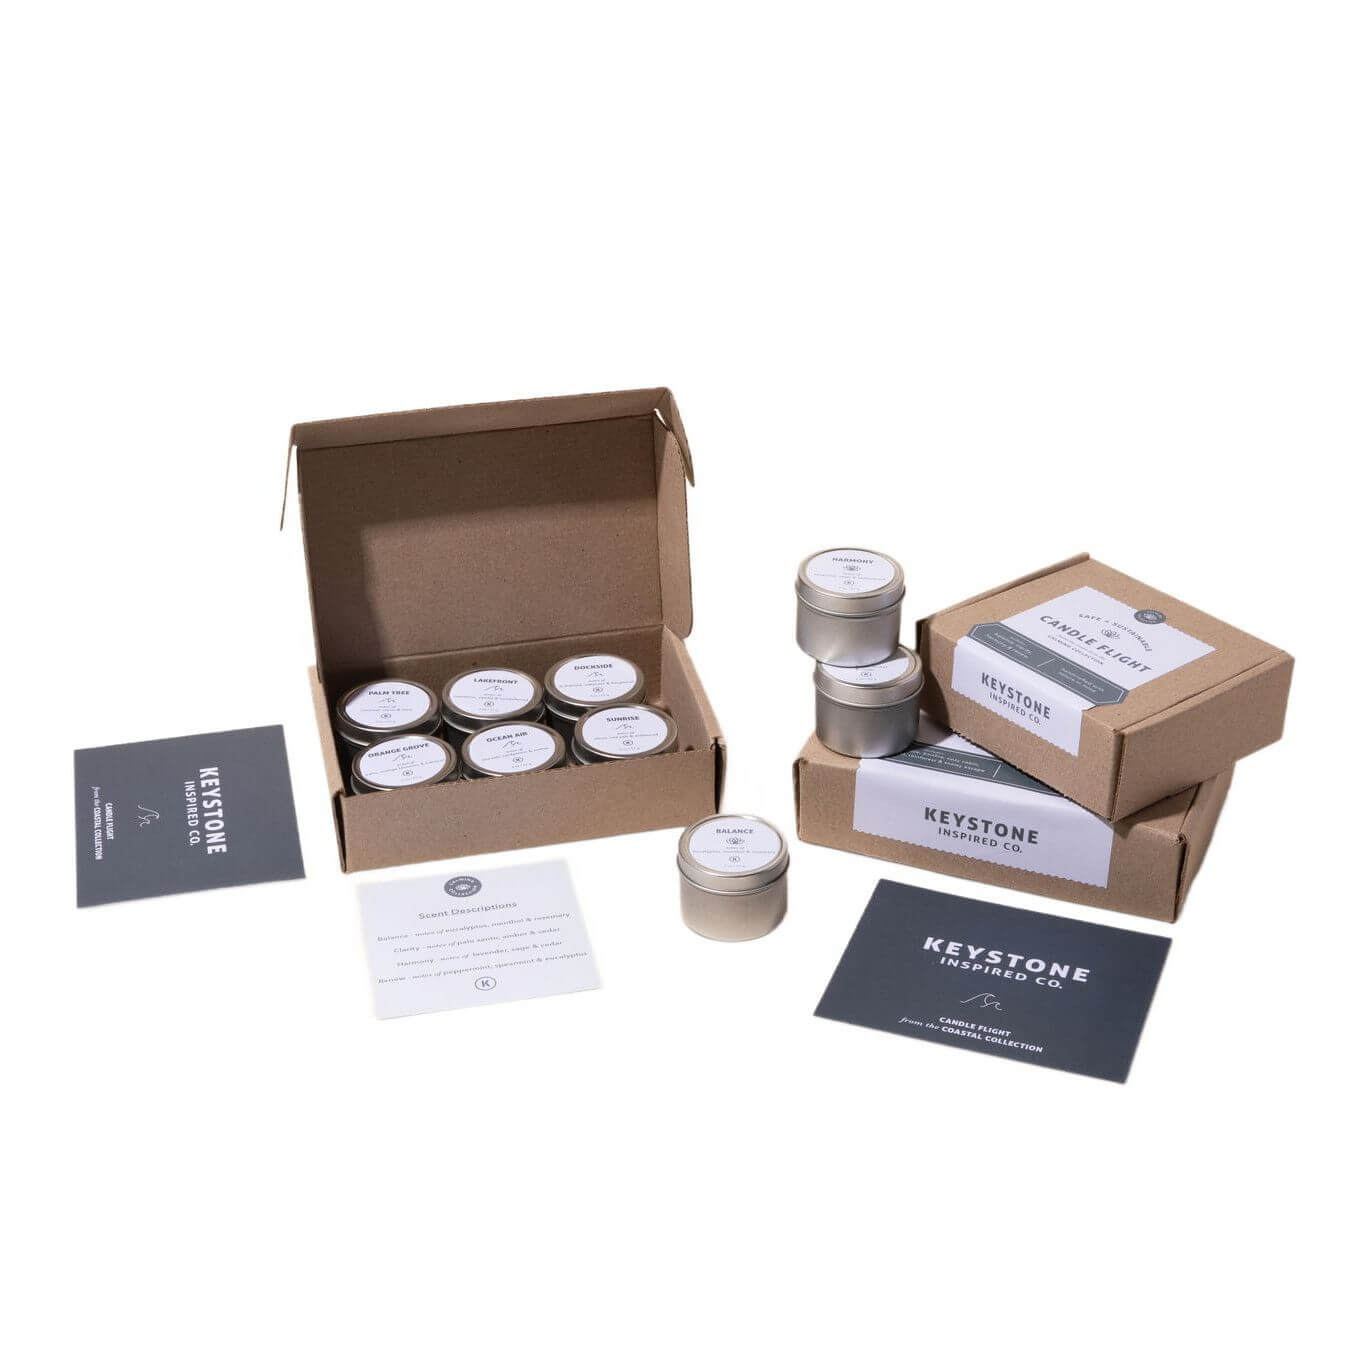 Eco-friendly Calming Collection | Candle Flight candle